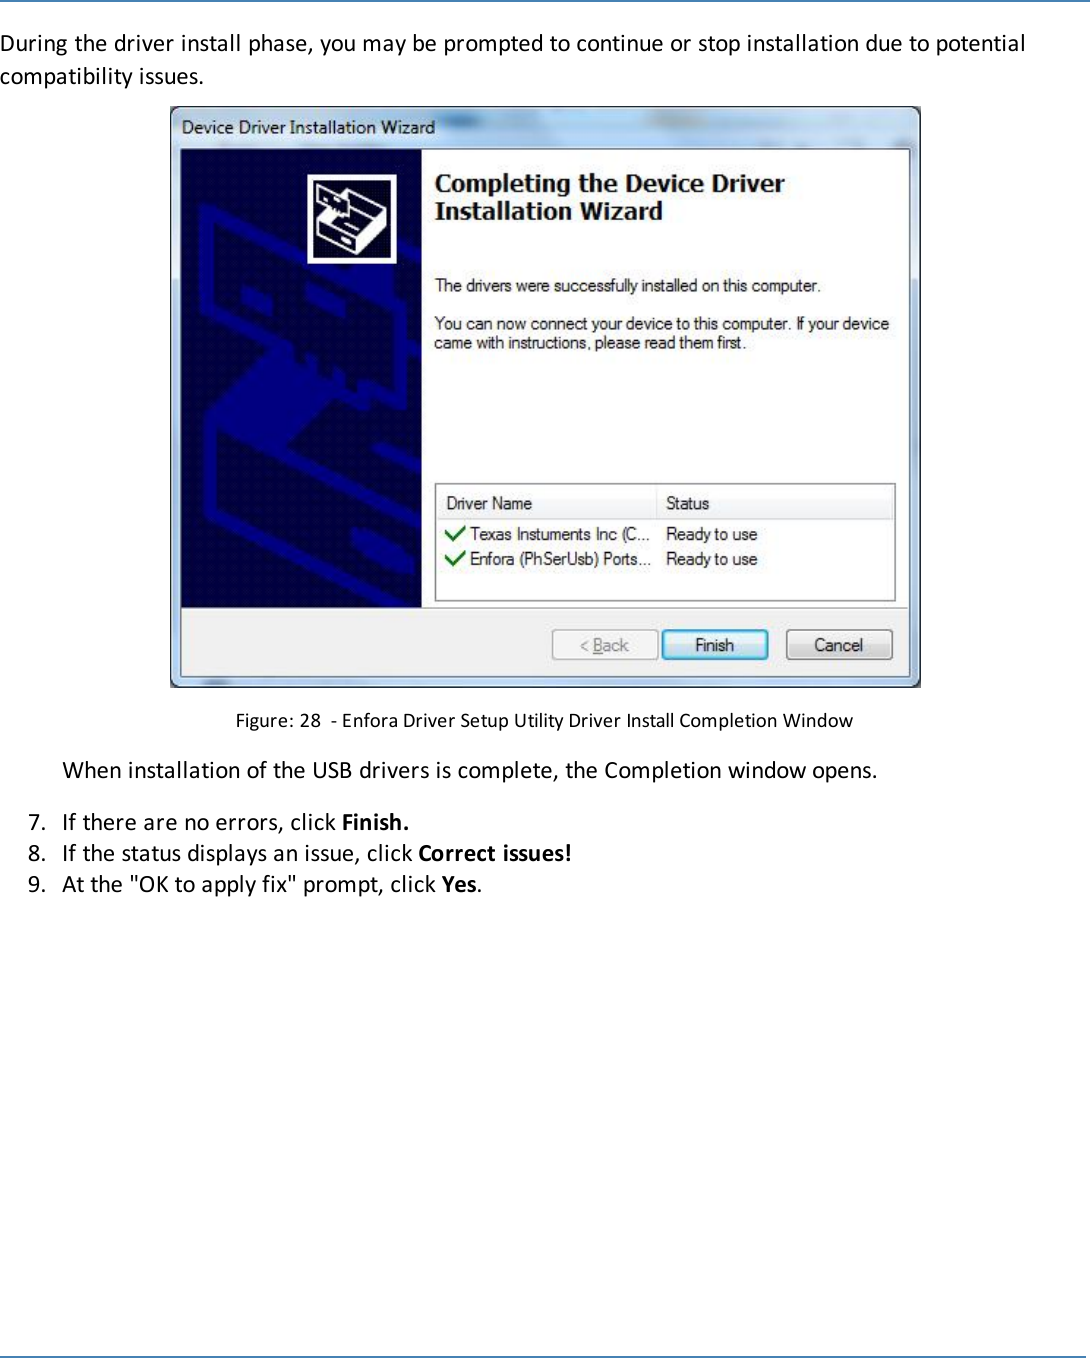 32During the driver install phase, you may be prompted to continue or stop installation due to potentialcompatibility issues.Figure: 28 - Enfora Driver Setup Utility Driver Install Completion WindowWhen installation of the USB drivers is complete, the Completion window opens.7. If there are no errors, click Finish.8. If the status displays an issue, click Correct issues!9. At the &quot;OK to apply fix&quot; prompt, click Yes.